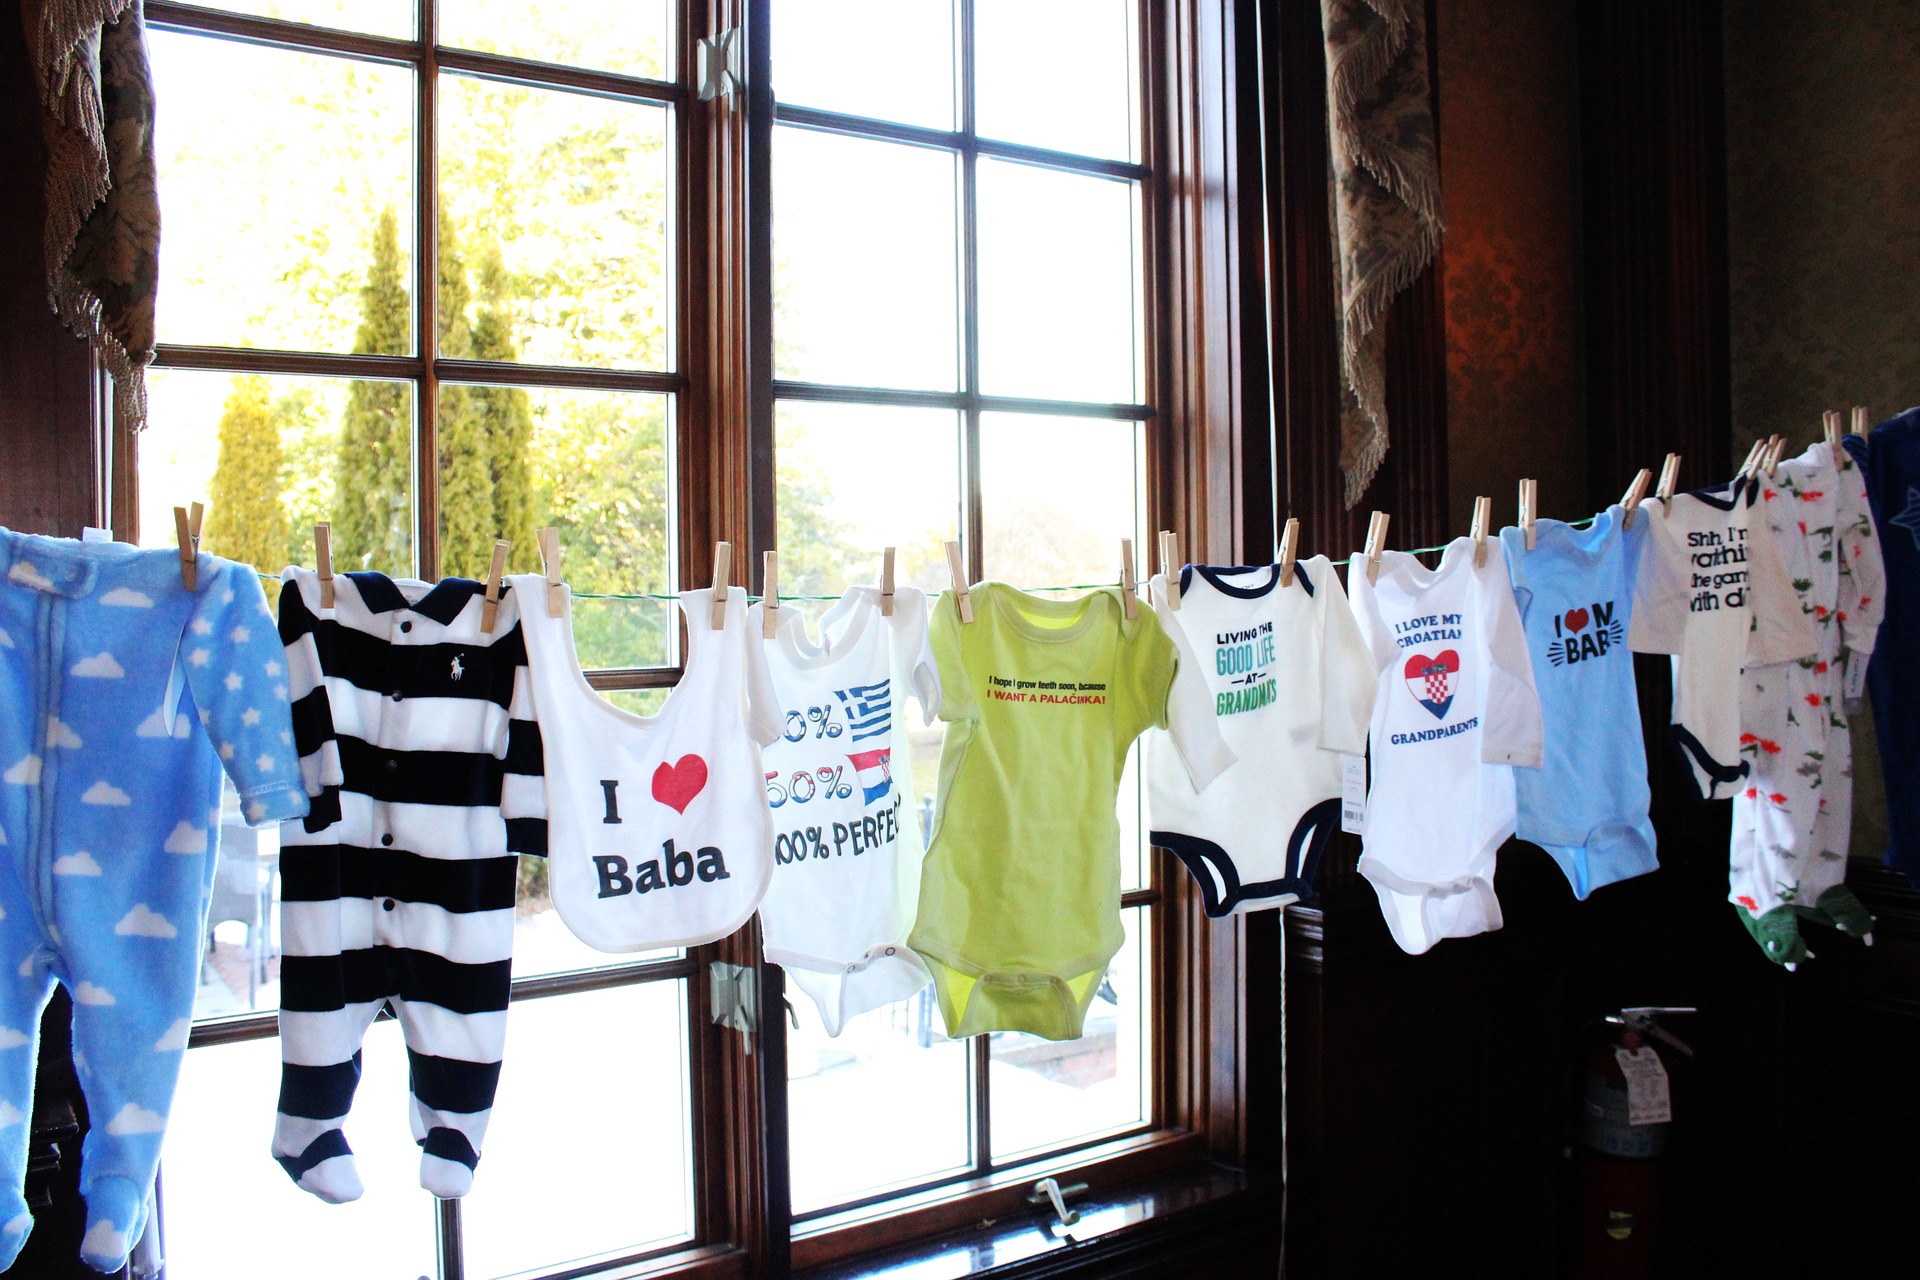 Baby Clothes: 5 Key Tips for Finding Your Child’s Size